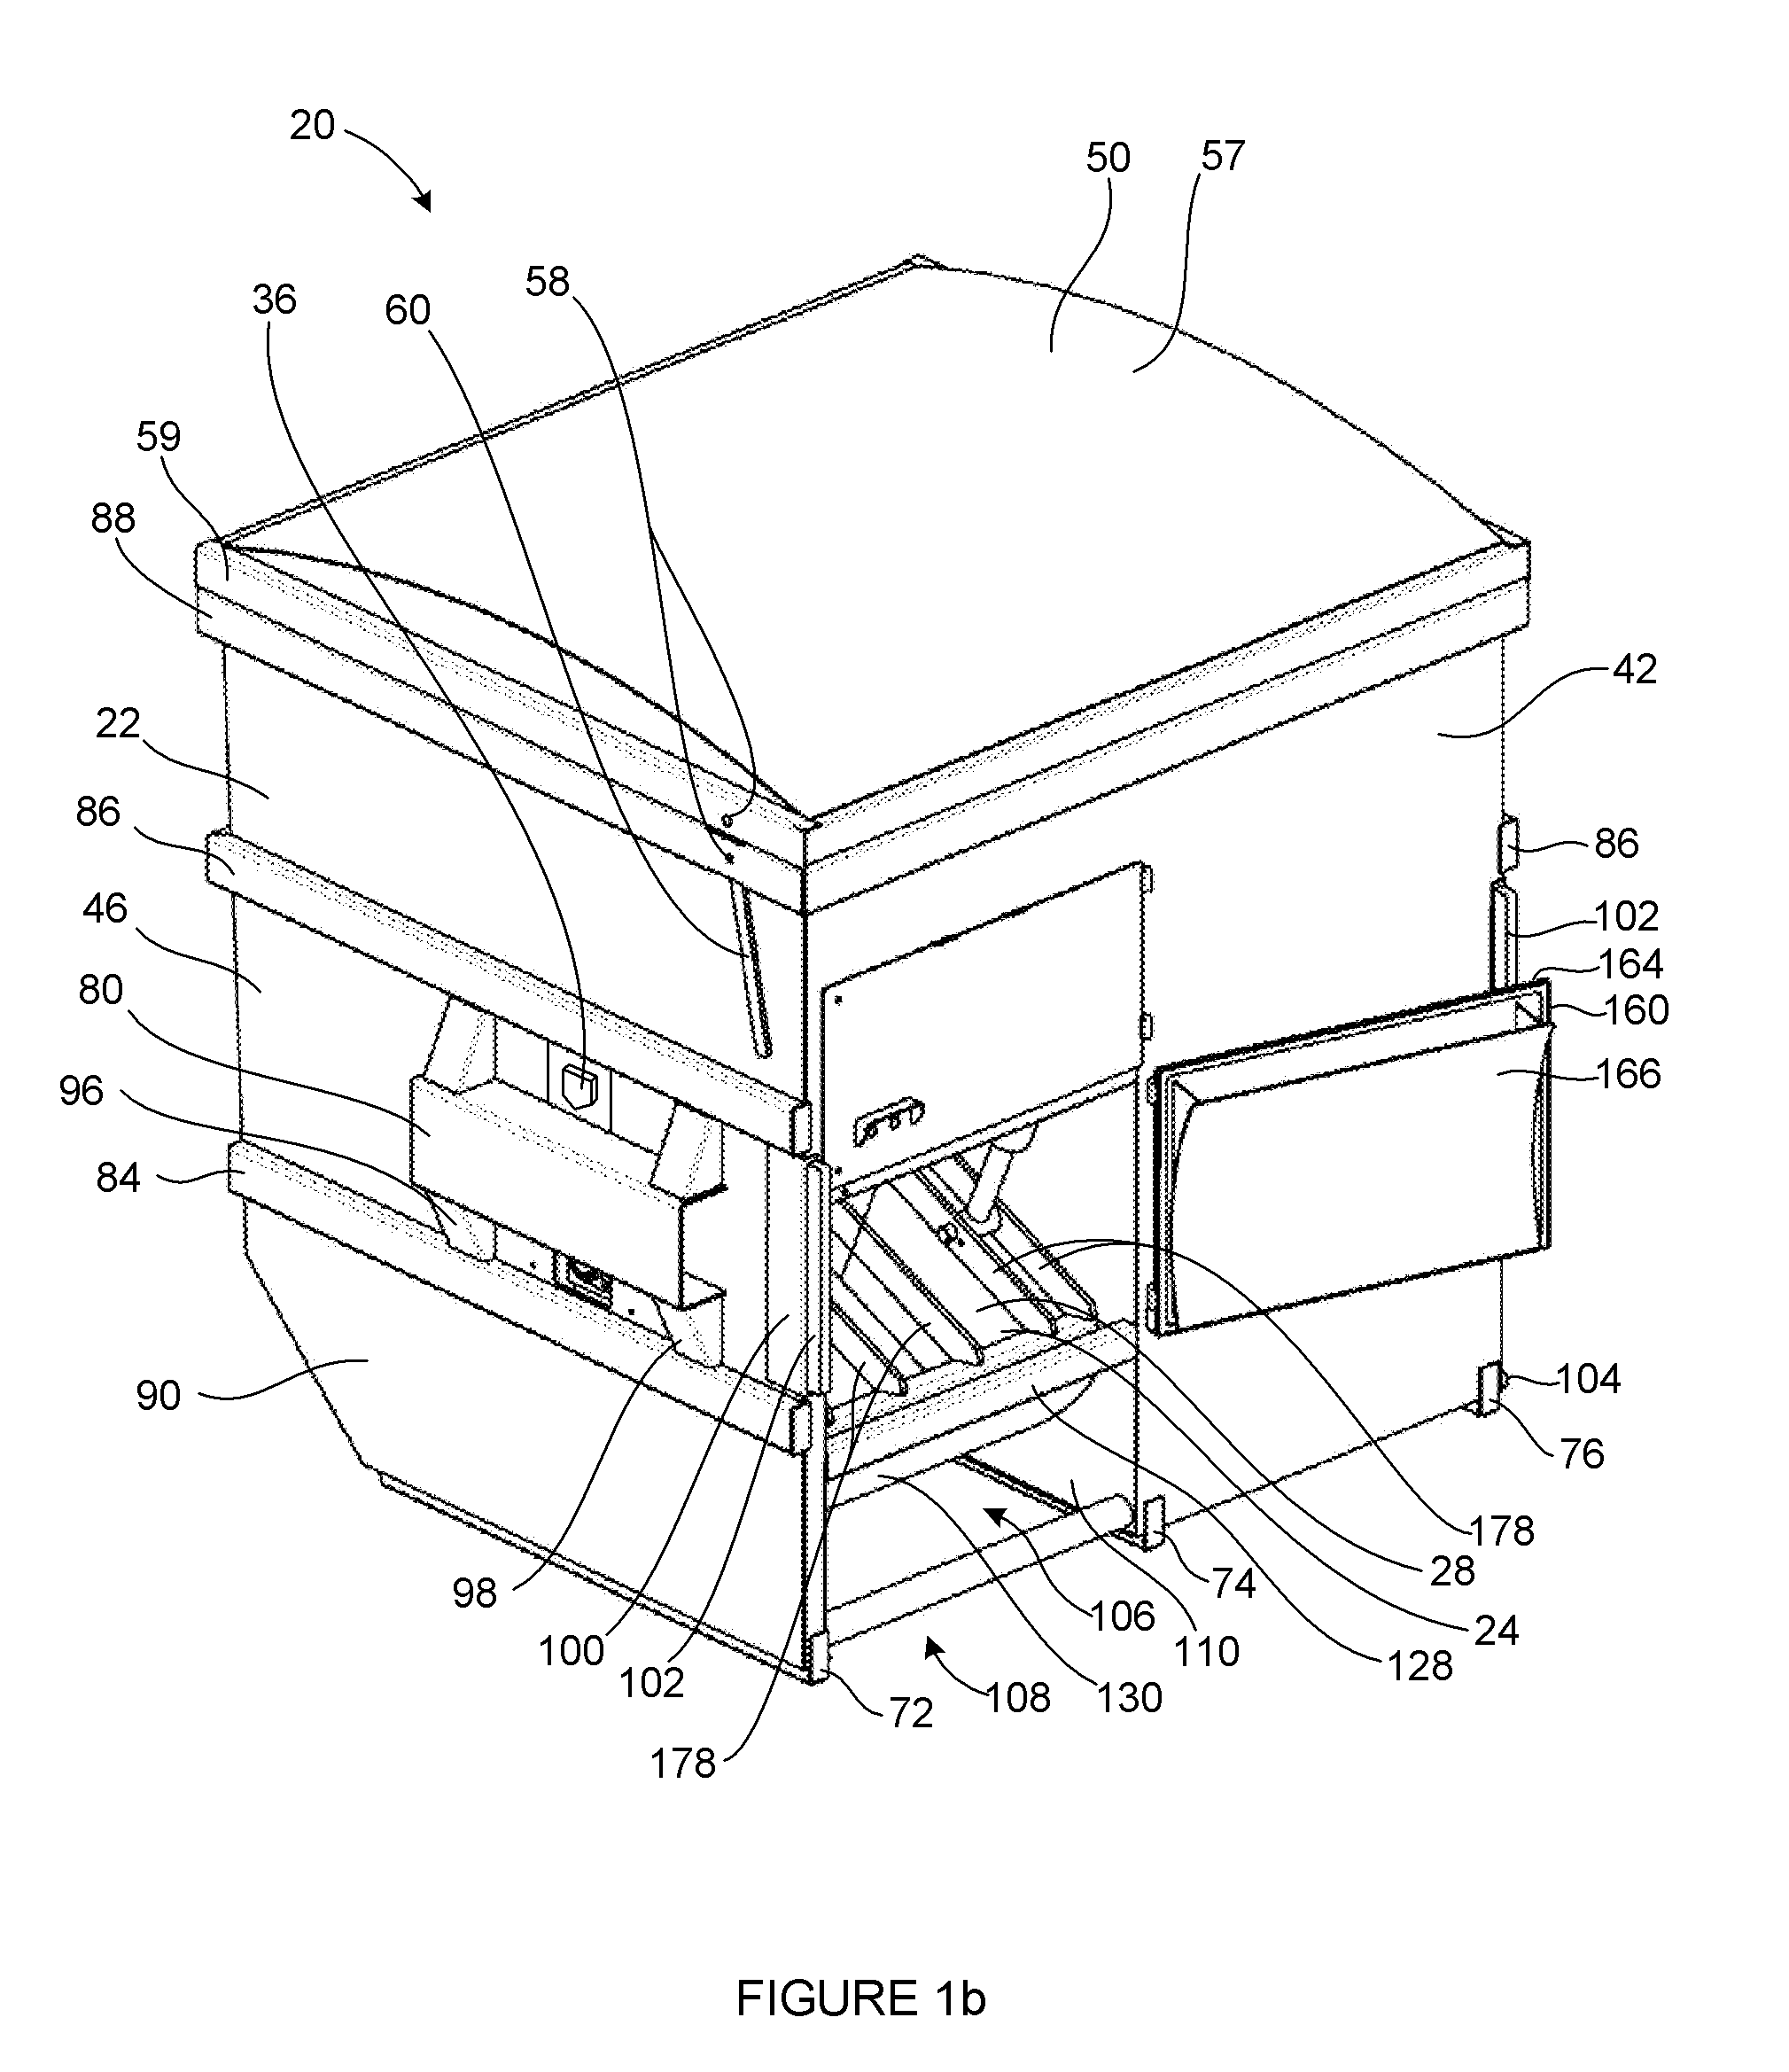 Waste containment apparatus